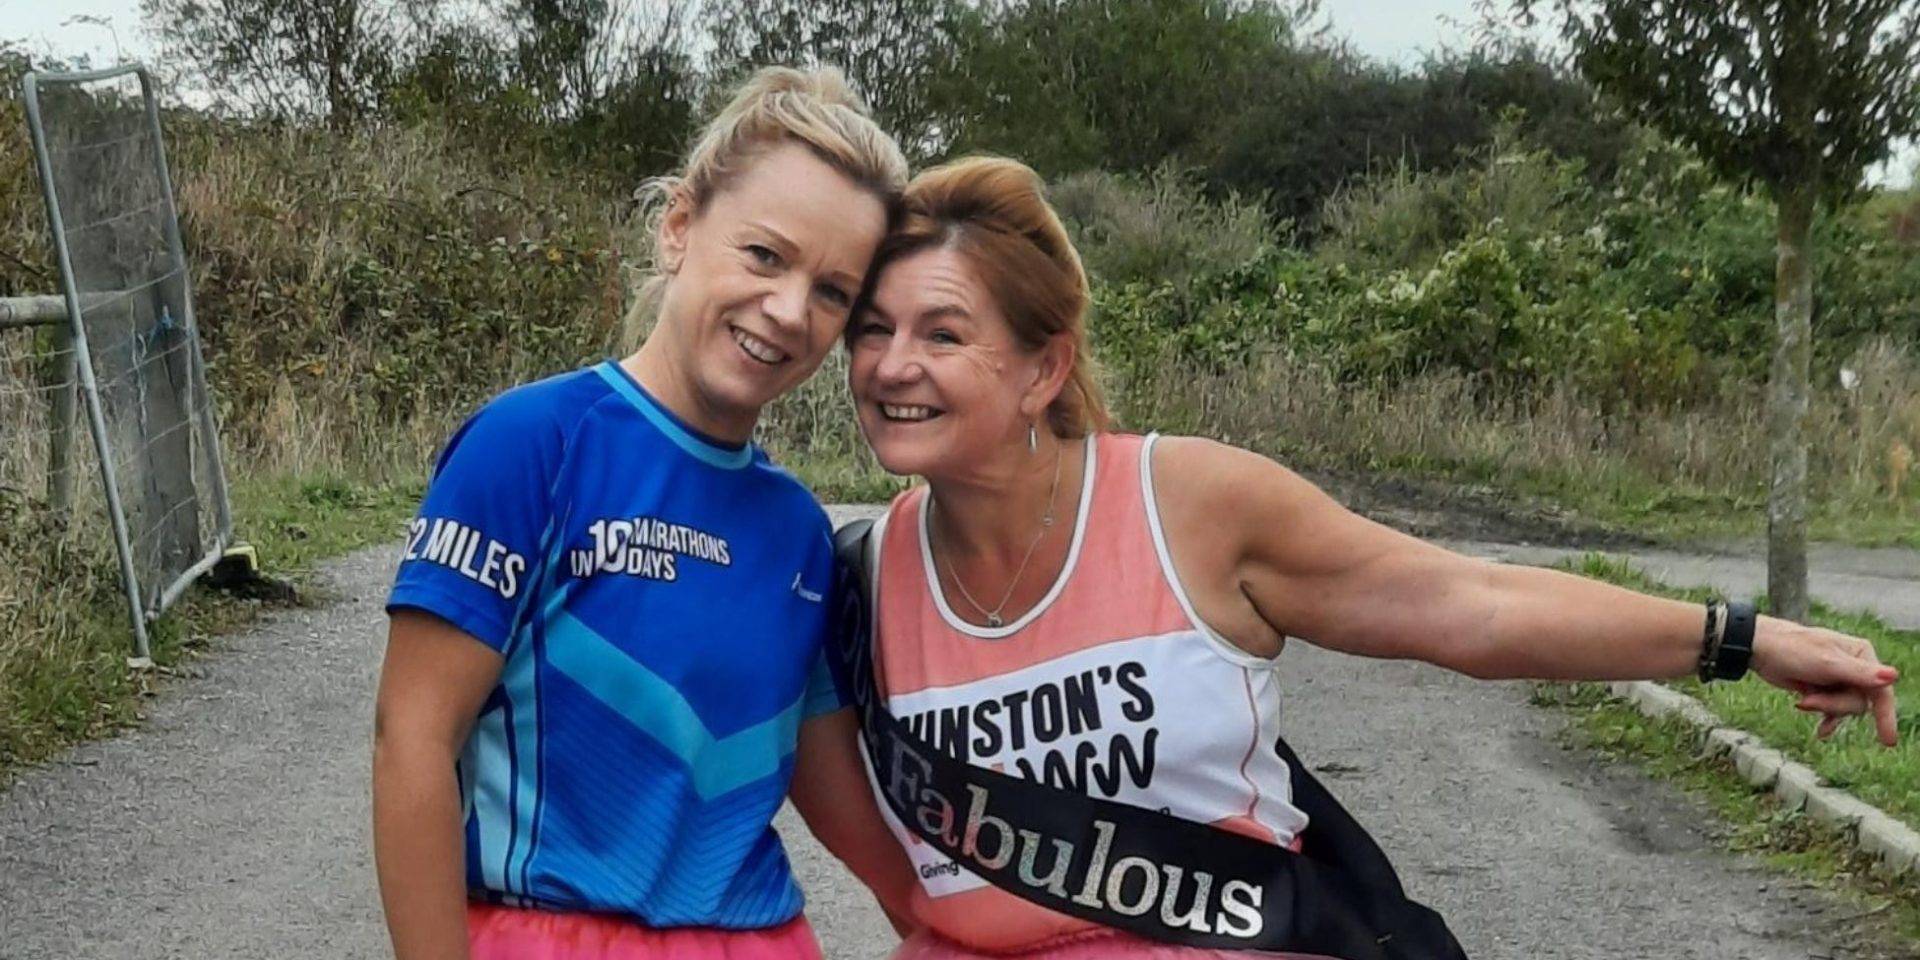 marie and friend after running her 100th marathon